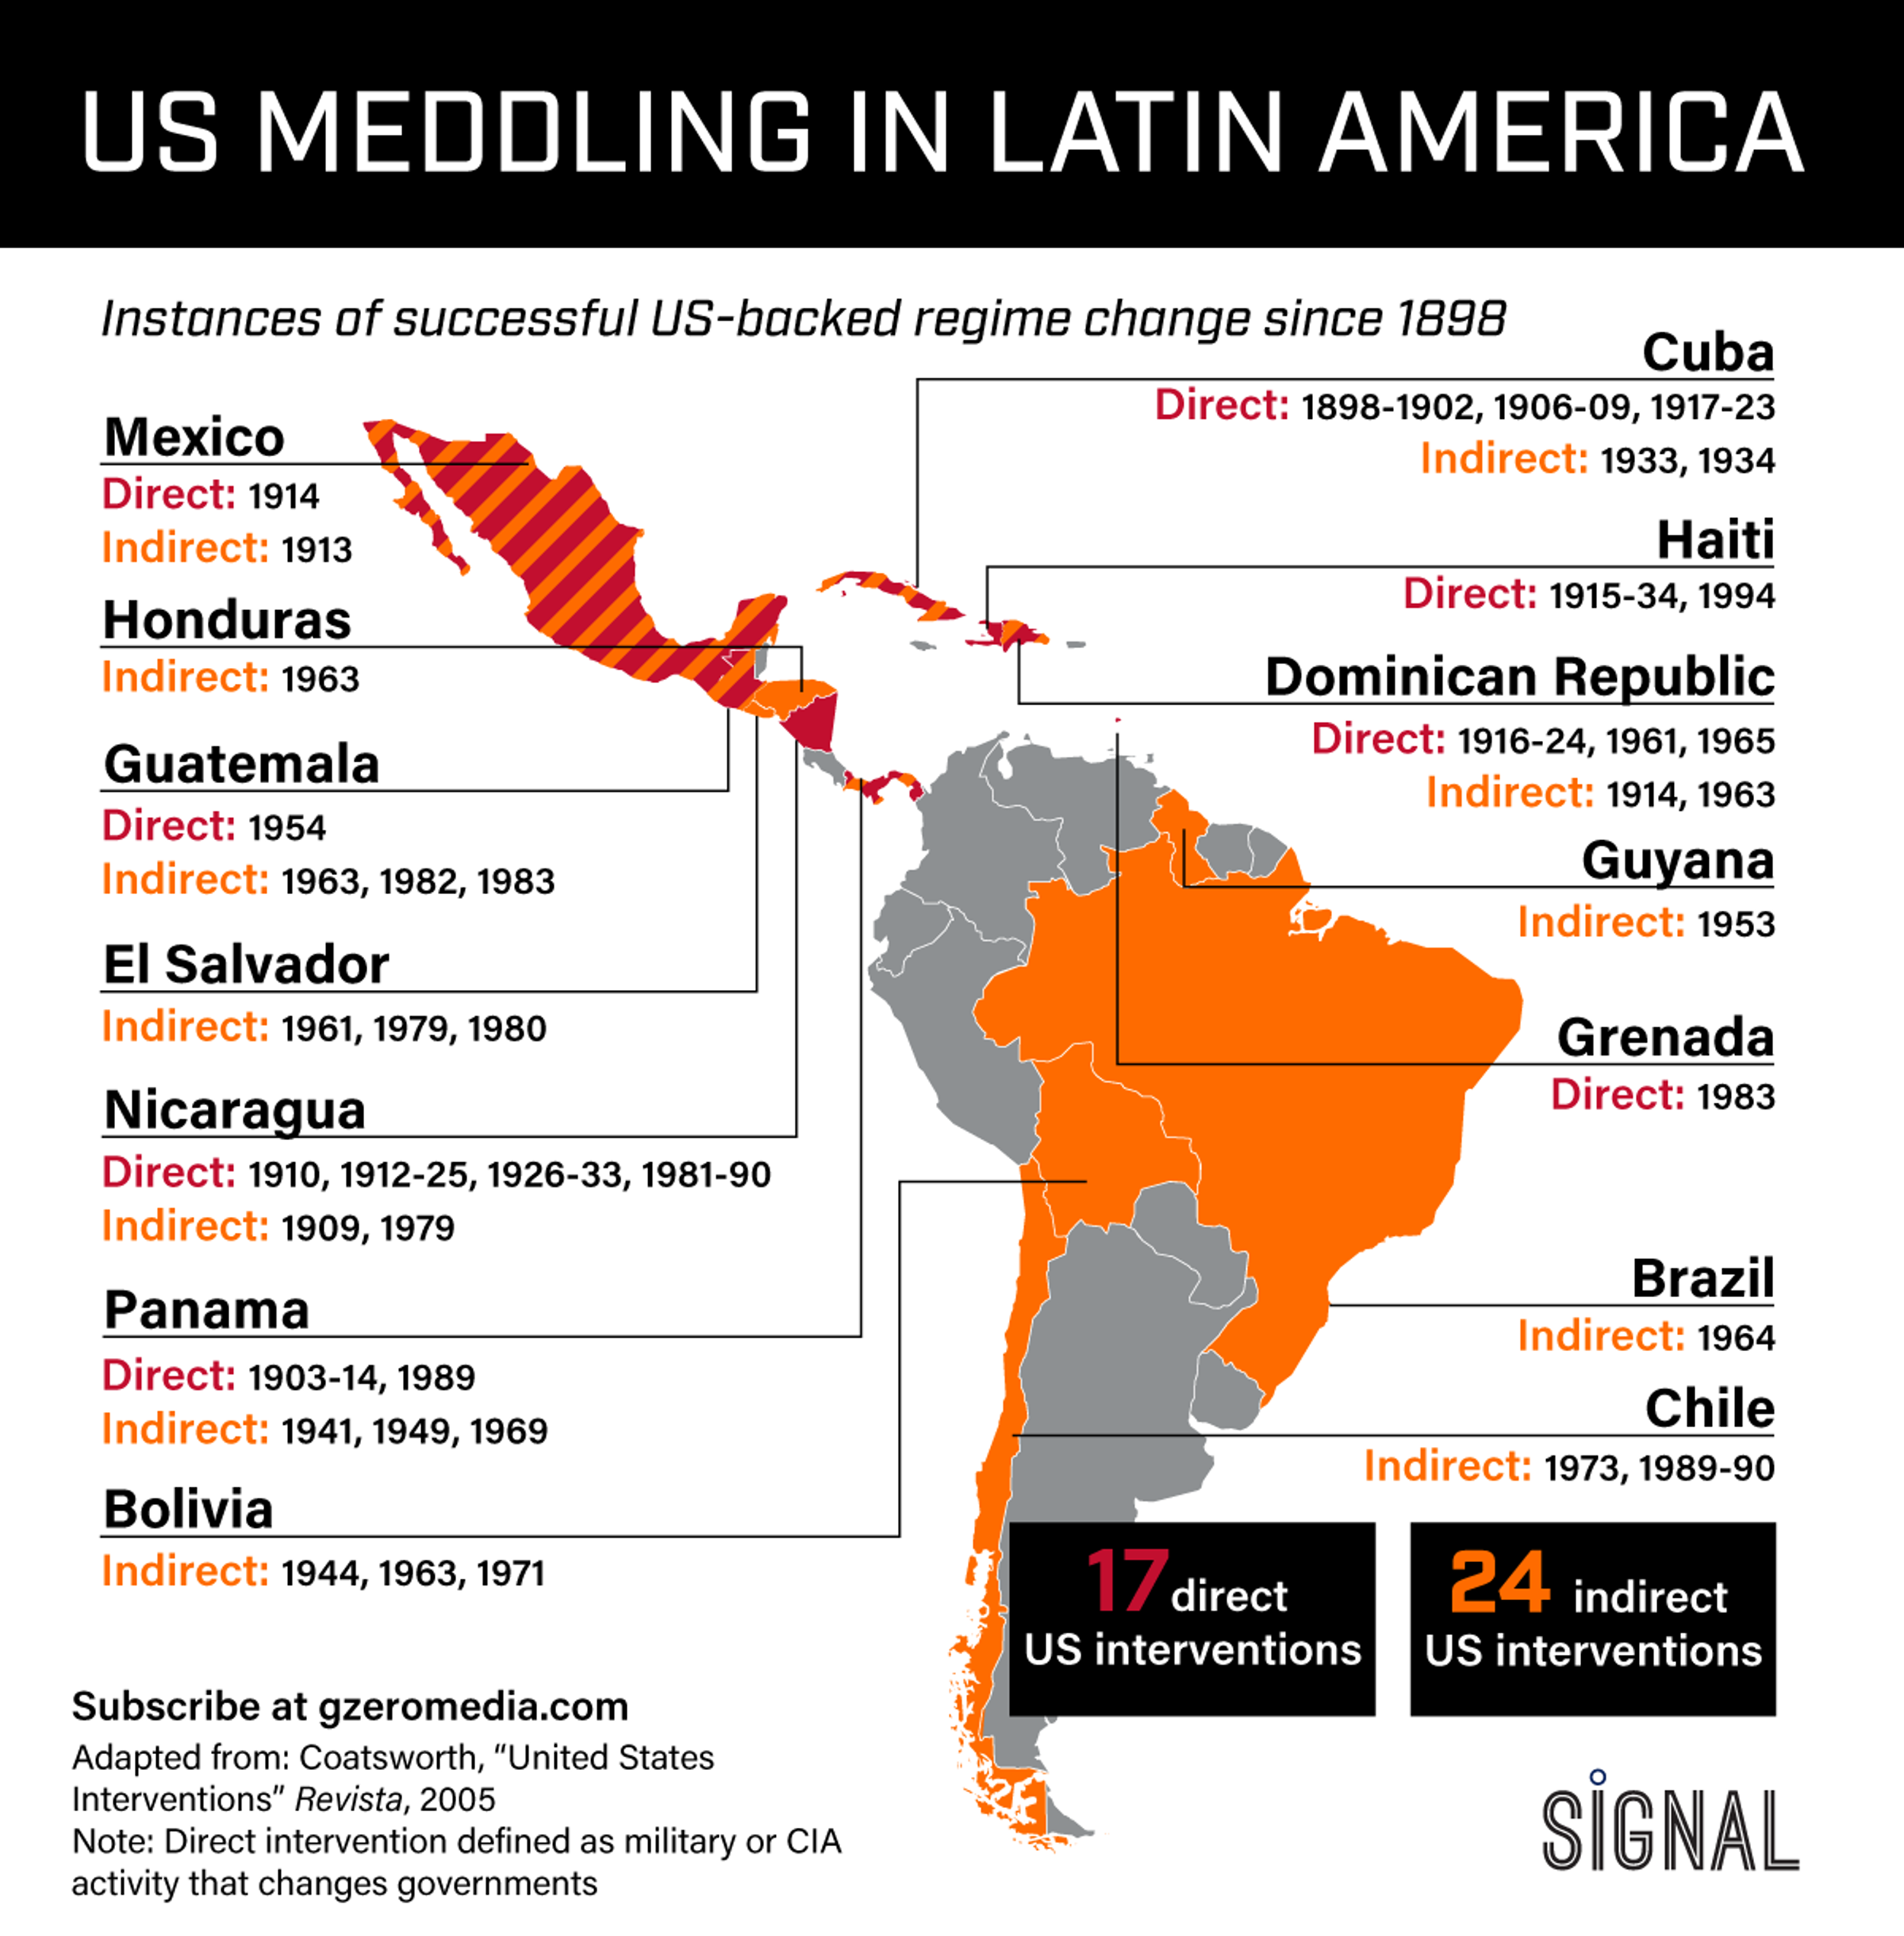 GRAPHIC TRUTH: US MEDDLING IN THE AMERICAS